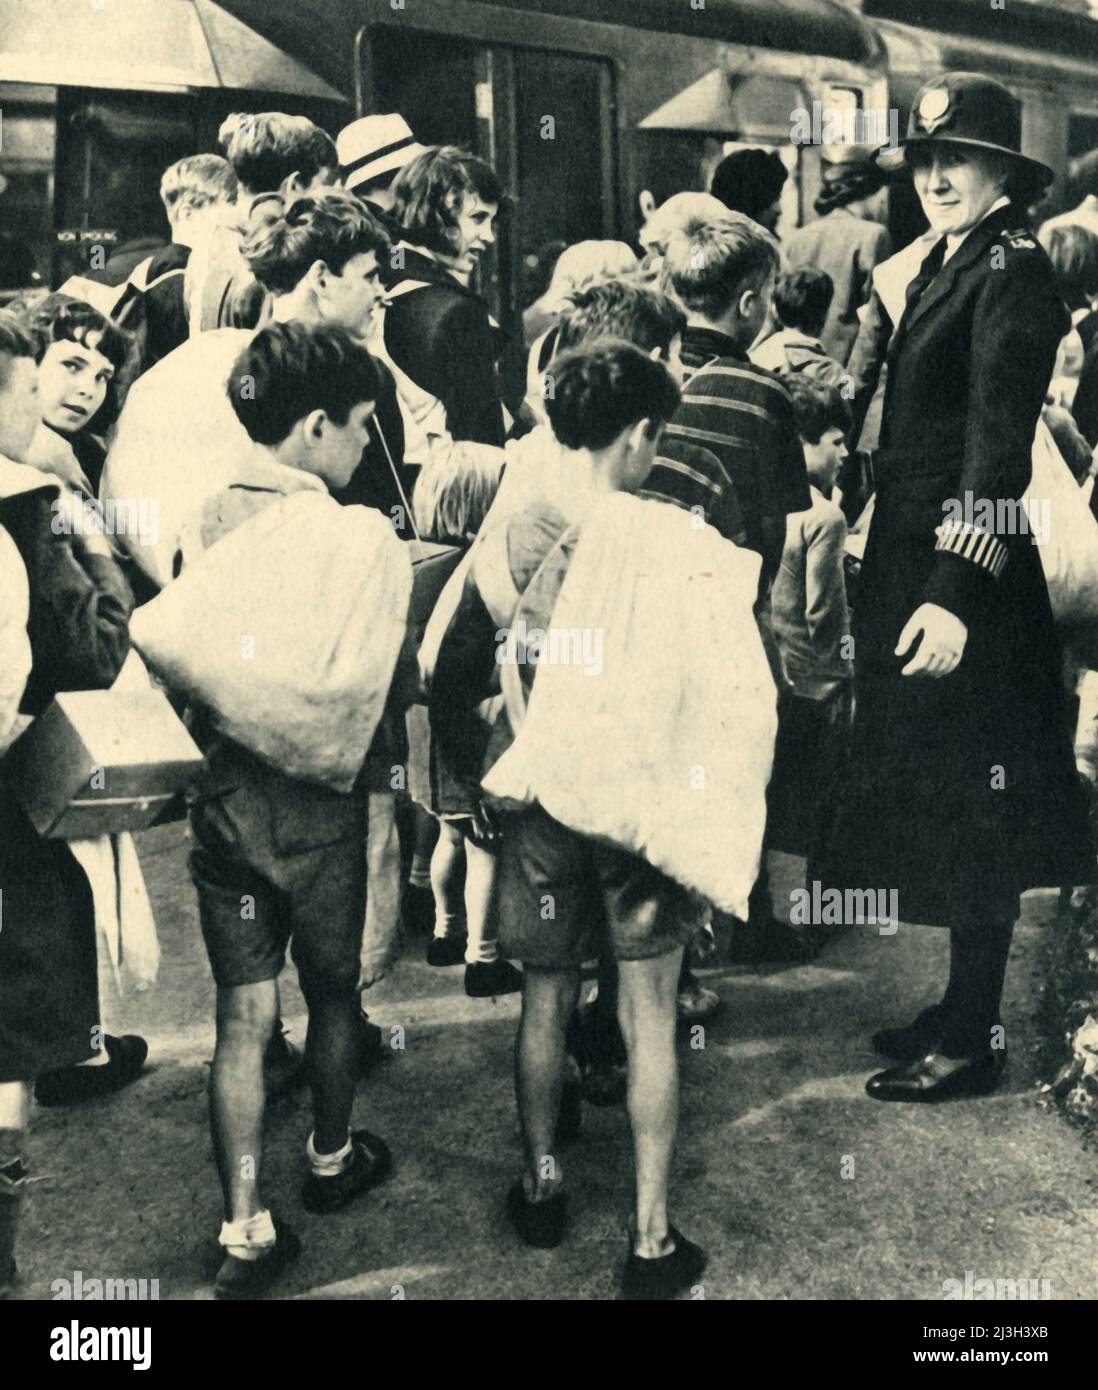 'Children Leaving London for the Country', 1943. British evacuees escape bombs during the Second World War. From &quot;Women's Institutes', by Cicely McCall. [Collins, London, 1943] Stock Photo